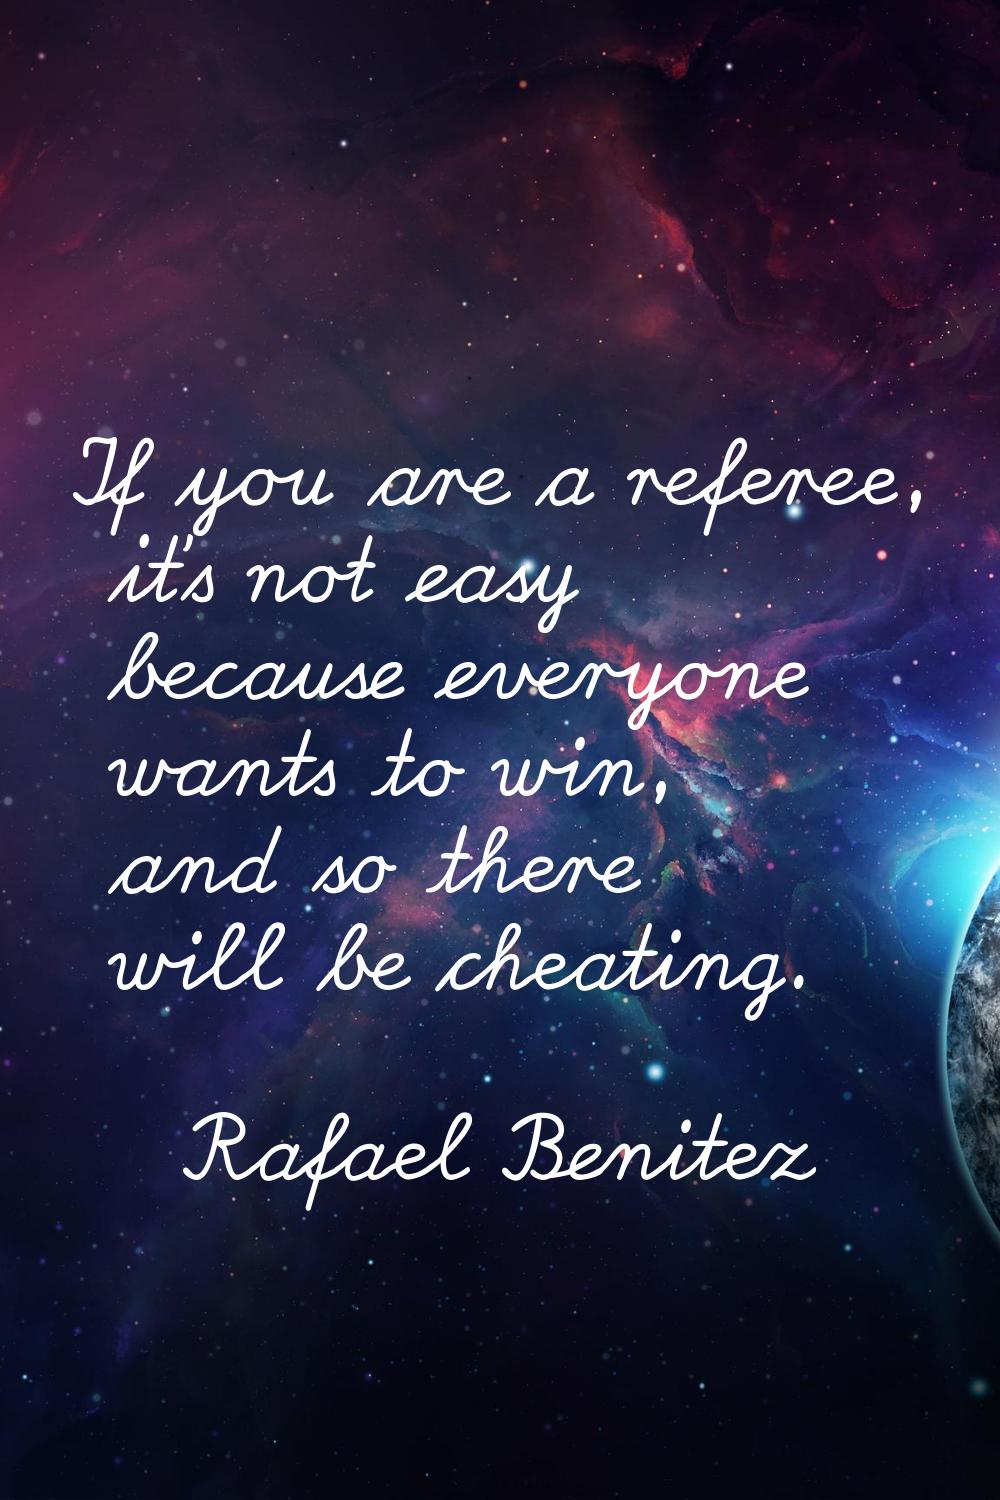 If you are a referee, it's not easy because everyone wants to win, and so there will be cheating.